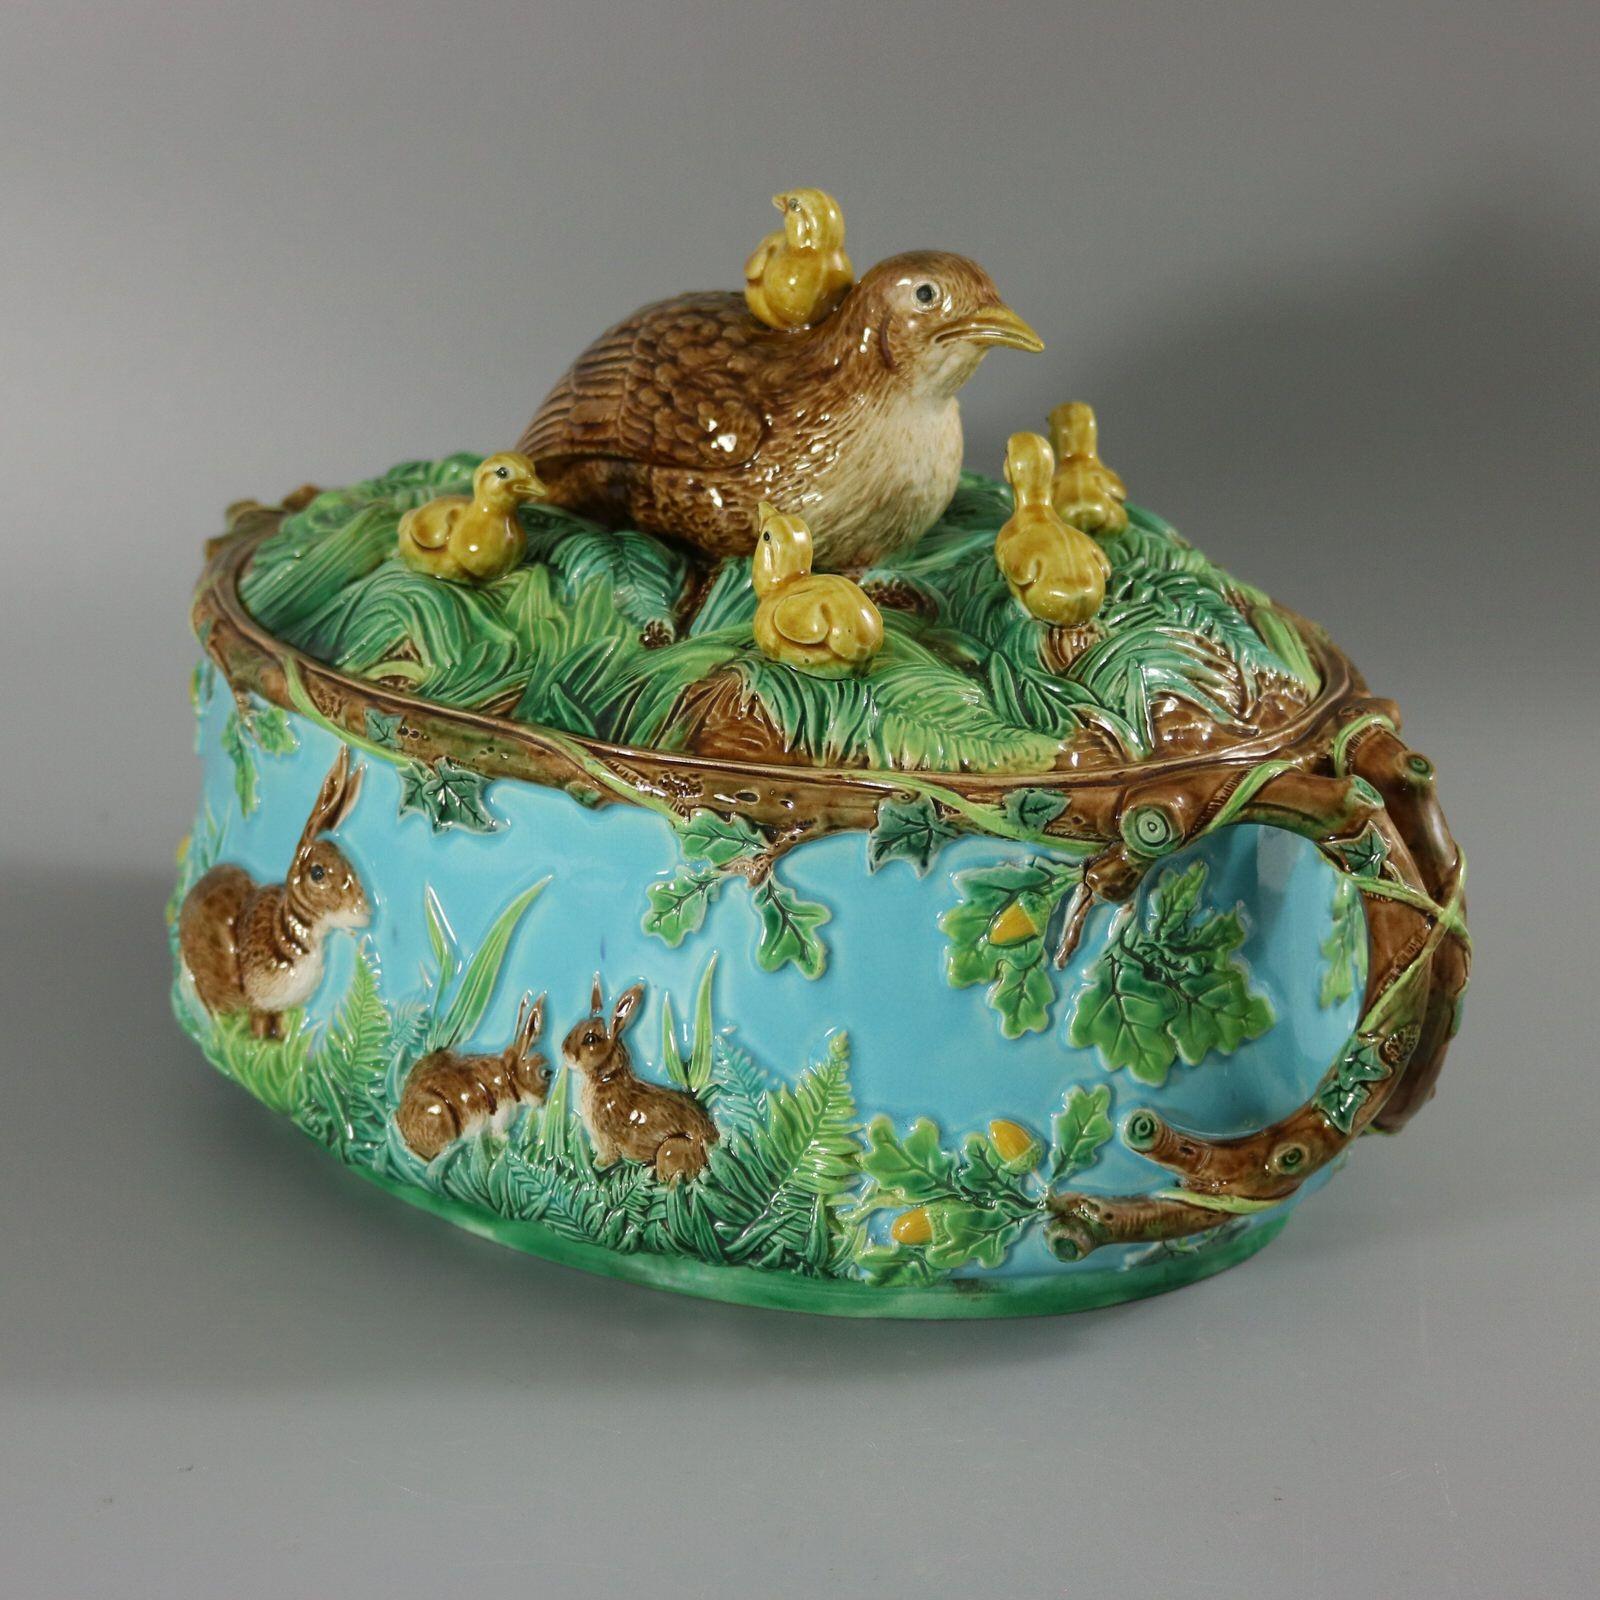 George Jones Majolica game pie dish which features features a partridge on a nest of grasses and ferns, with seven chicks. One chick is sat on its mother's back, and another is tucked under her wing. The dish with grazing rabbits to the sides.